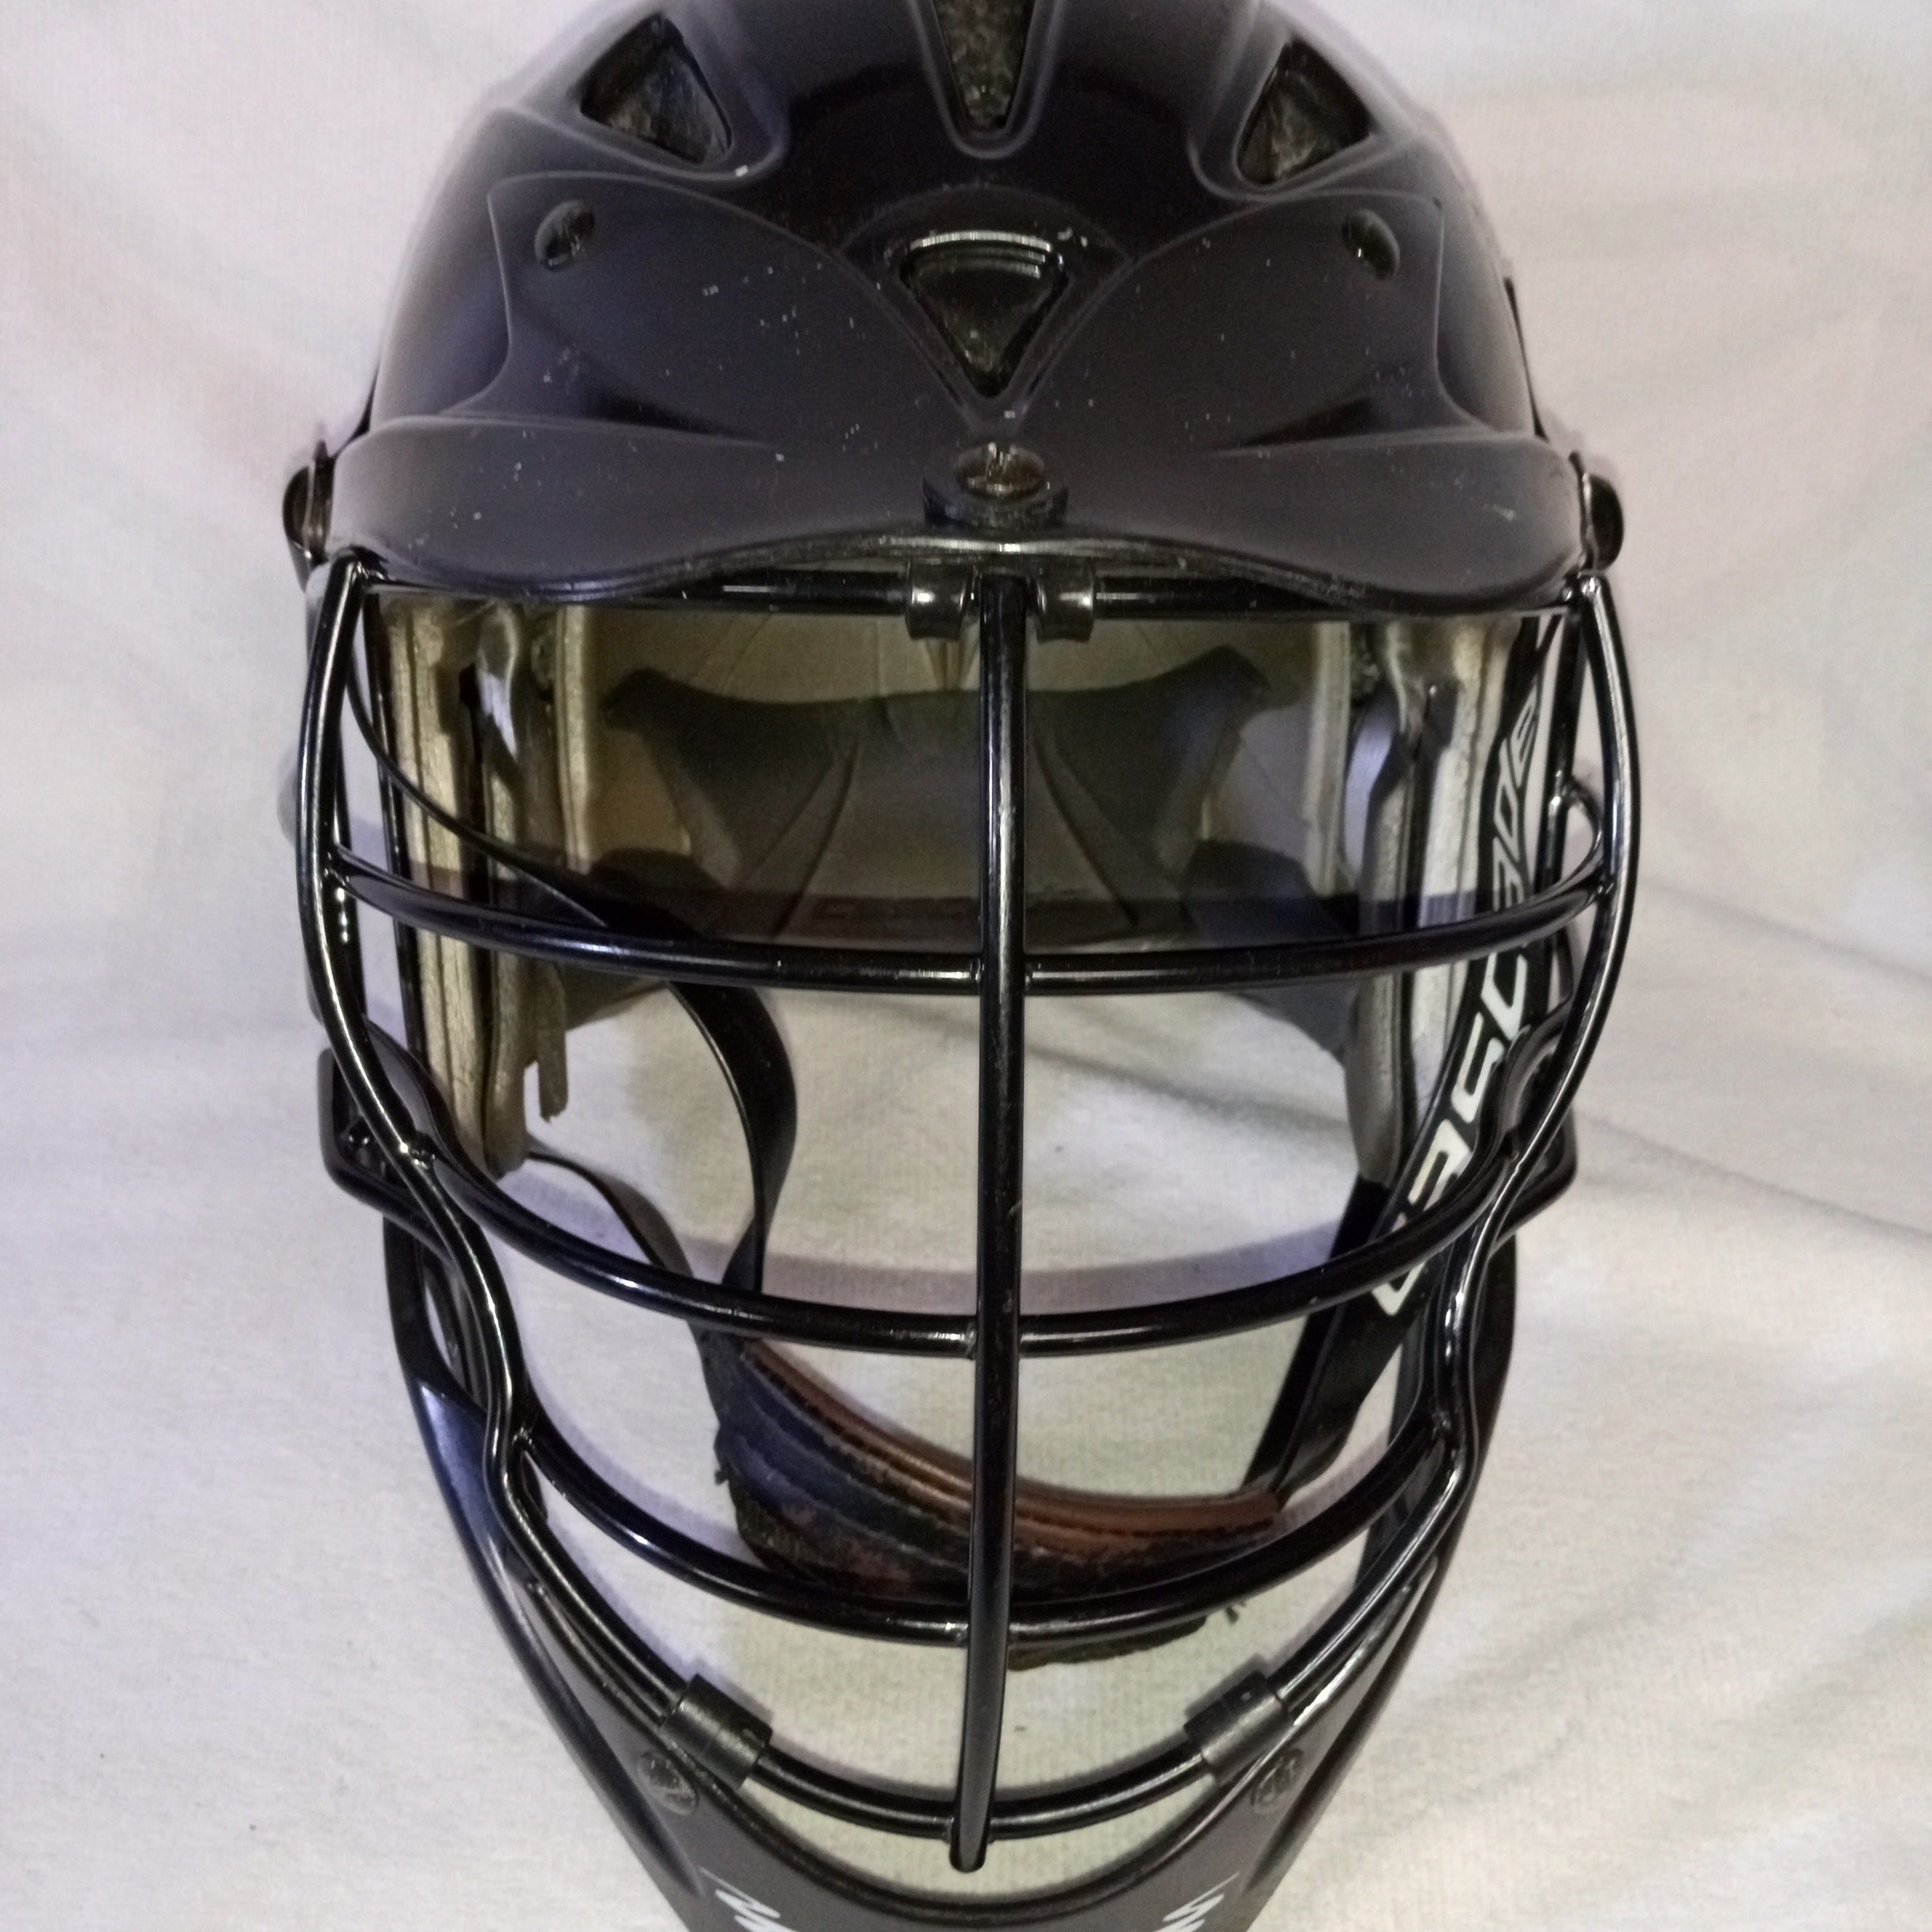 Cascade lacrosse helmet Cpx-R Black/Yellow Adult adjustable With Chin Strap 